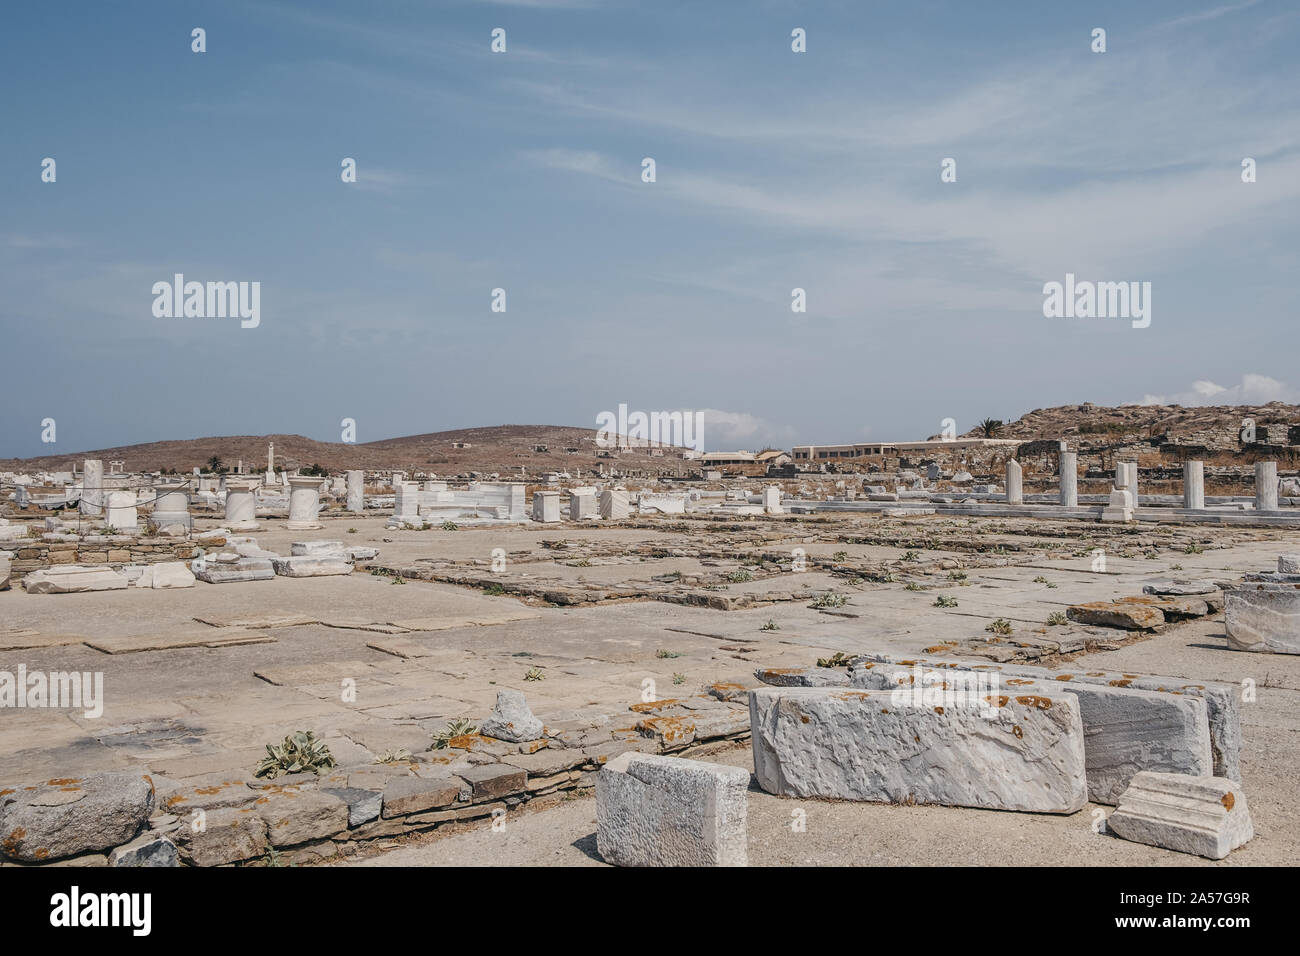 Ruins of agora on the historic island of Delos, Greece, Archaeological Museum of Delos on the background. Stock Photo